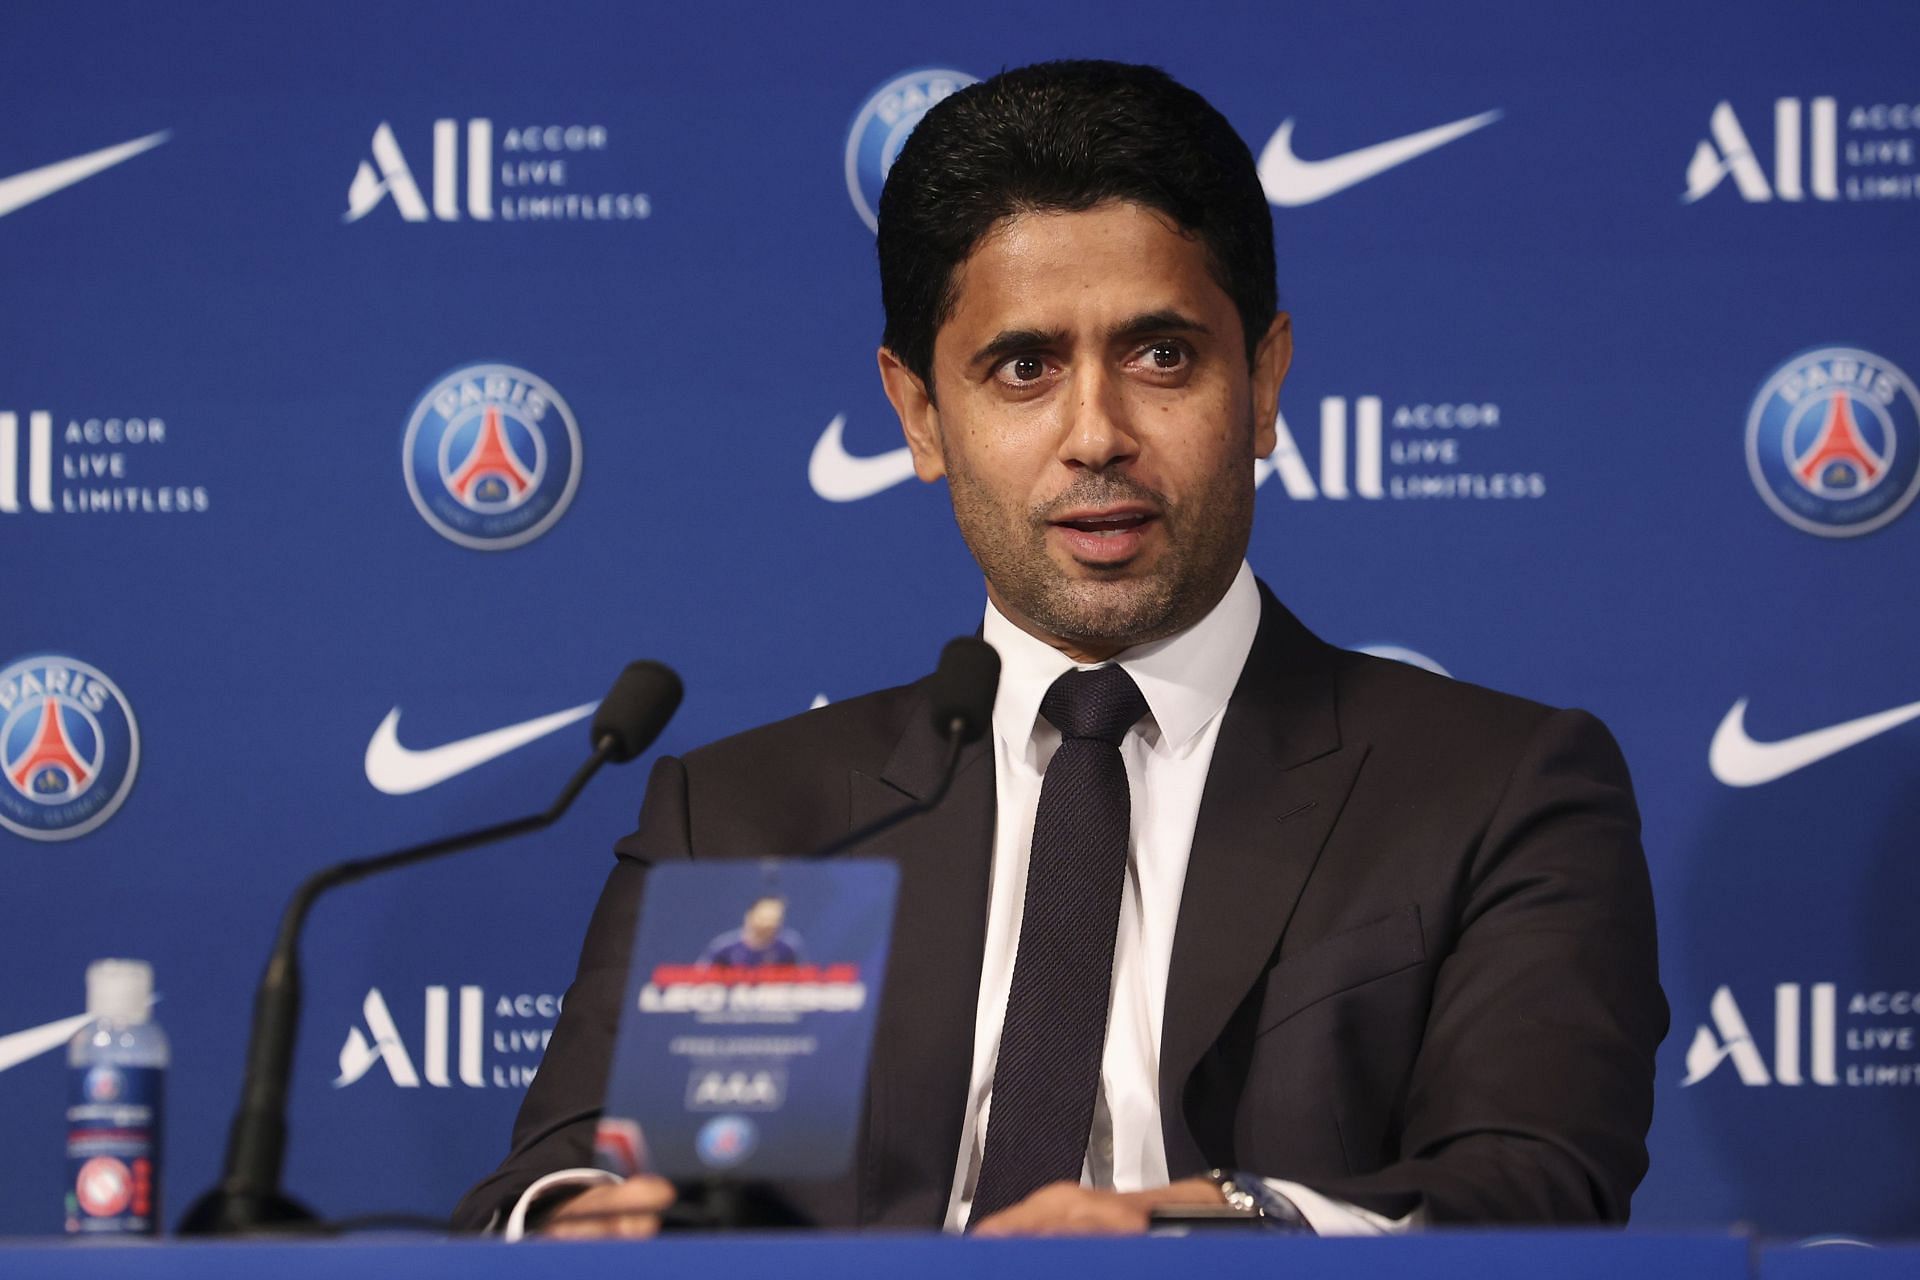 Nasser Al-Khelaifi called out Barcelona for selling their assets.